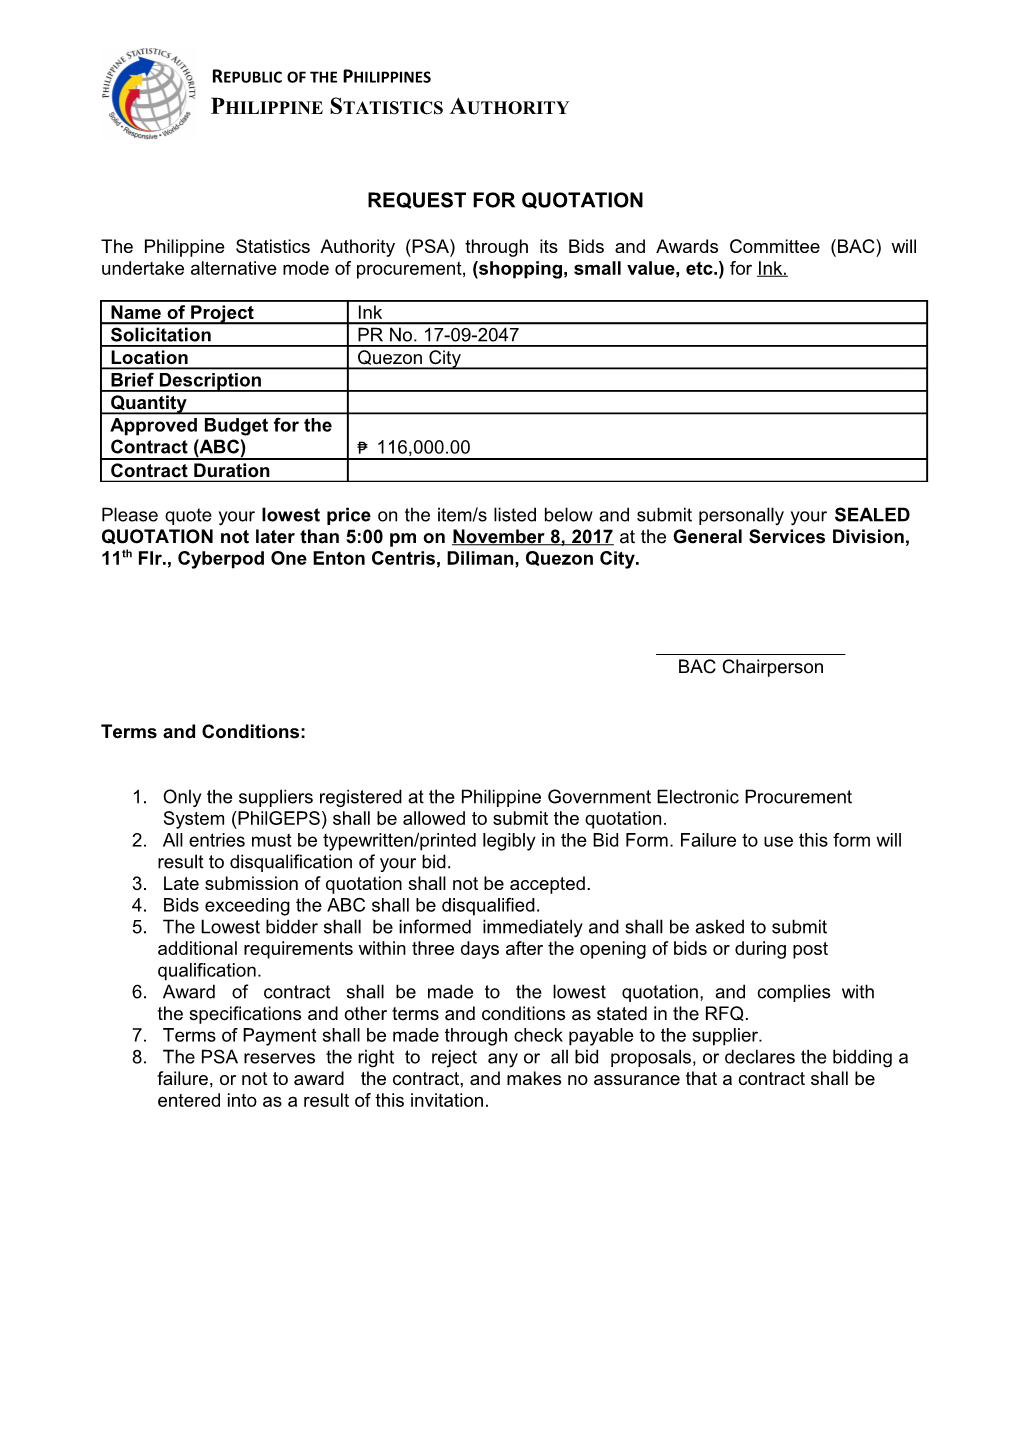 Request for Quotation s18